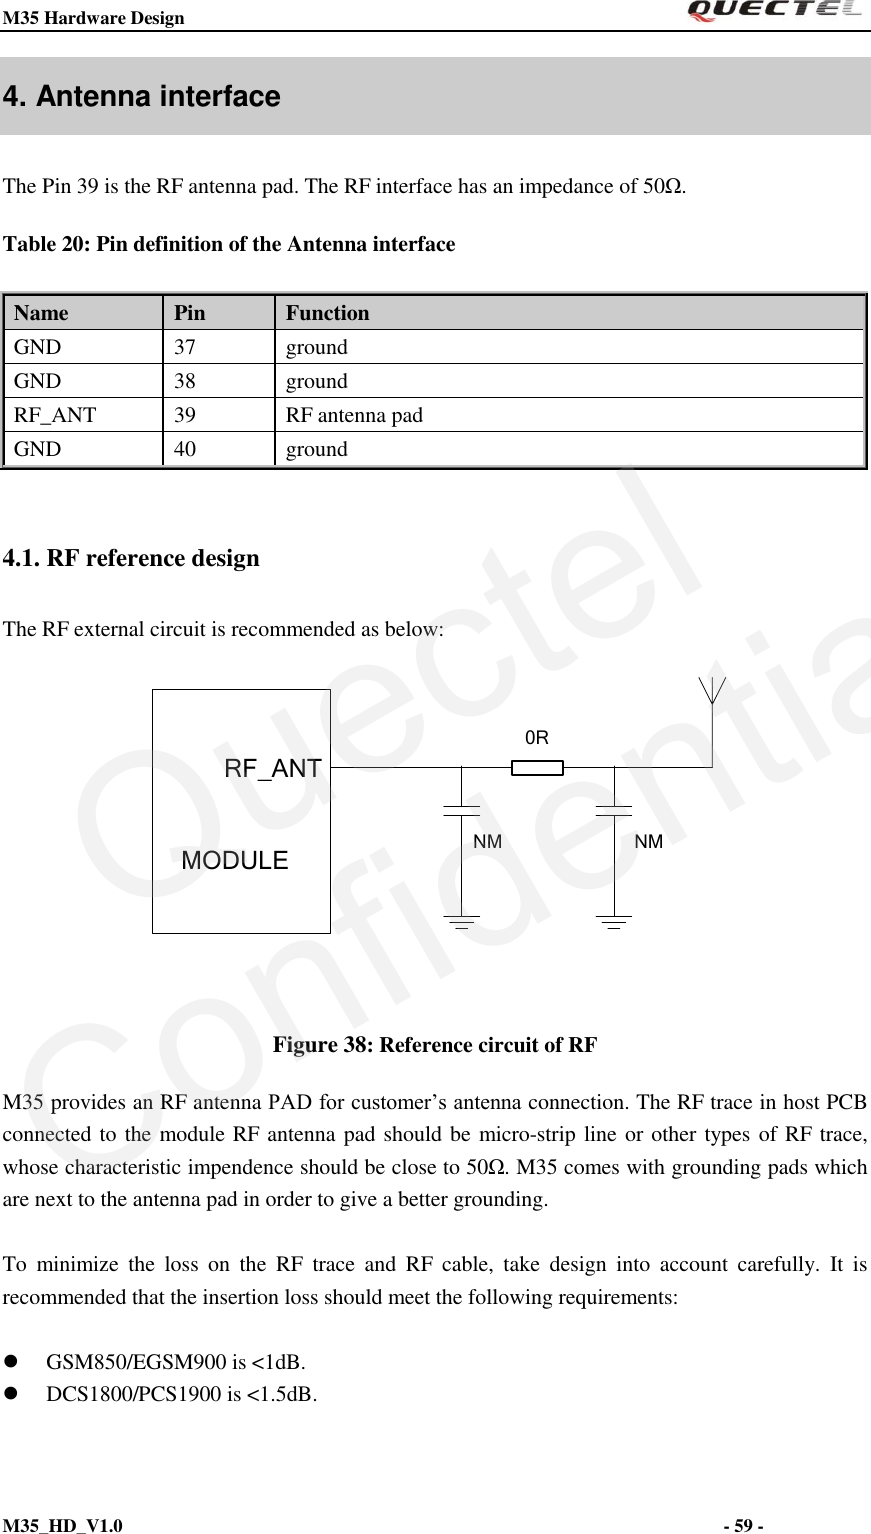 M35 Hardware Design                                                                  M35_HD_V1.0                                                                                                                         - 59 -    4. Antenna interface The Pin 39 is the RF antenna pad. The RF interface has an impedance of 50Ω.   Table 20: Pin definition of the Antenna interface  4.1. RF reference design The RF external circuit is recommended as below: RF_ANT0RMODULE NMNM Figure 38: Reference circuit of RF M35 provides an RF antenna PAD for customer’s antenna connection. The RF trace in host PCB connected to the module RF antenna pad should be micro-strip line or other types of RF trace, whose characteristic impendence should be close to 50Ω. M35 comes with grounding pads which are next to the antenna pad in order to give a better grounding.    To  minimize  the  loss  on  the  RF  trace  and  RF  cable,  take  design  into  account  carefully.  It  is recommended that the insertion loss should meet the following requirements:   GSM850/EGSM900 is &lt;1dB.    DCS1800/PCS1900 is &lt;1.5dB. Name   Pin   Function GND 37 ground GND 38 ground RF_ANT 39 RF antenna pad GND 40 ground QuectelConfidential